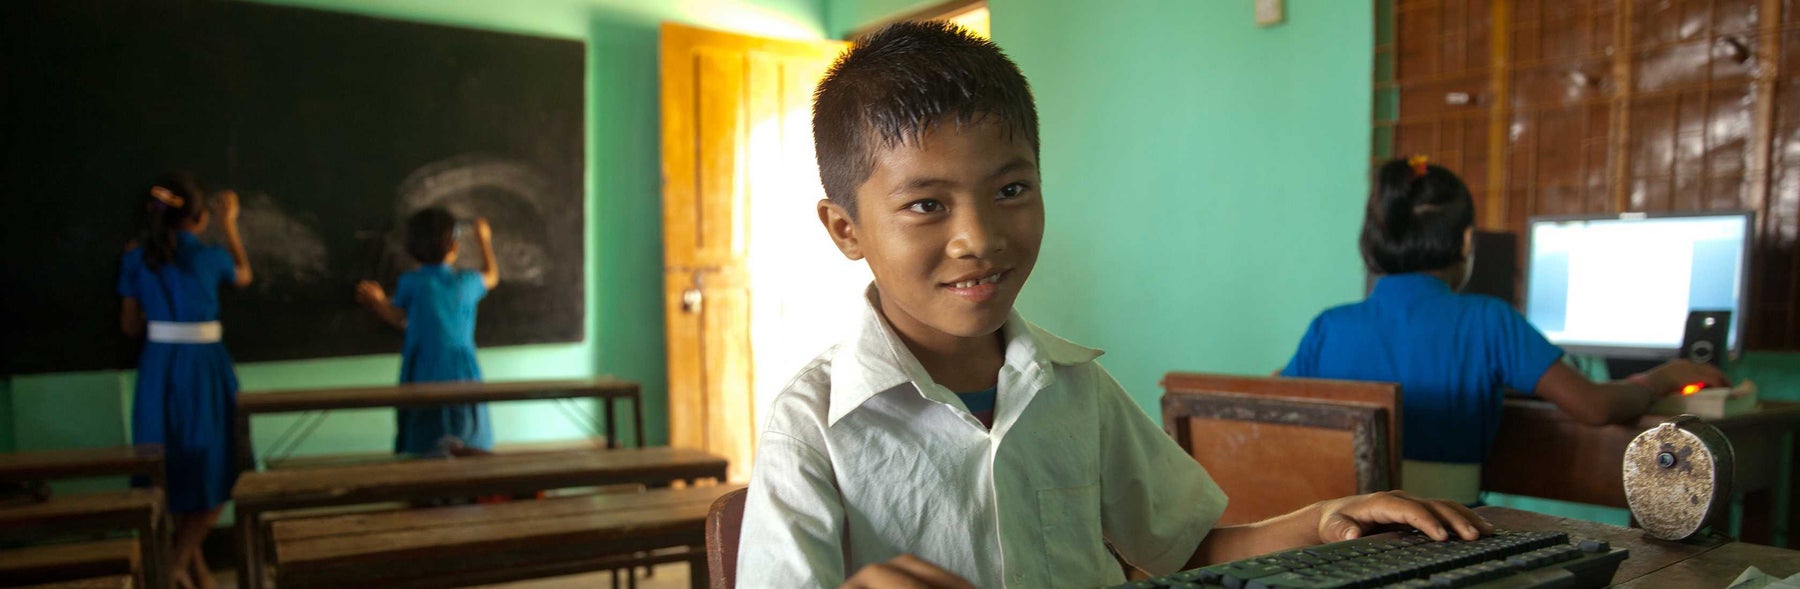 Young boy in a classroom smiling at the camera